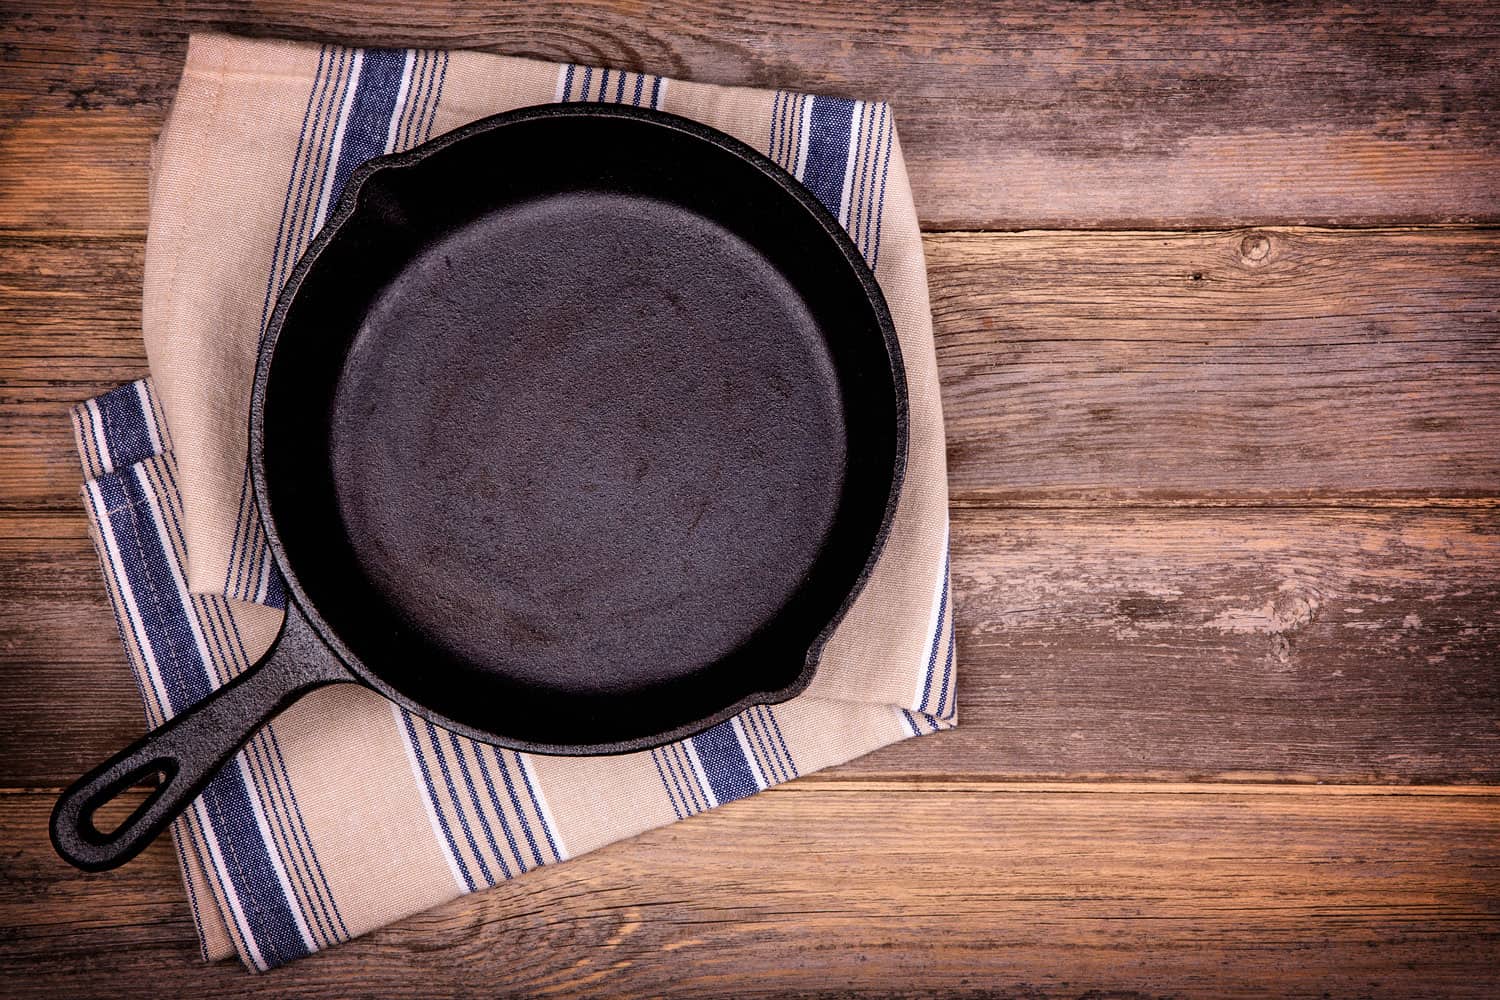 An empty skillet placed on a cloth